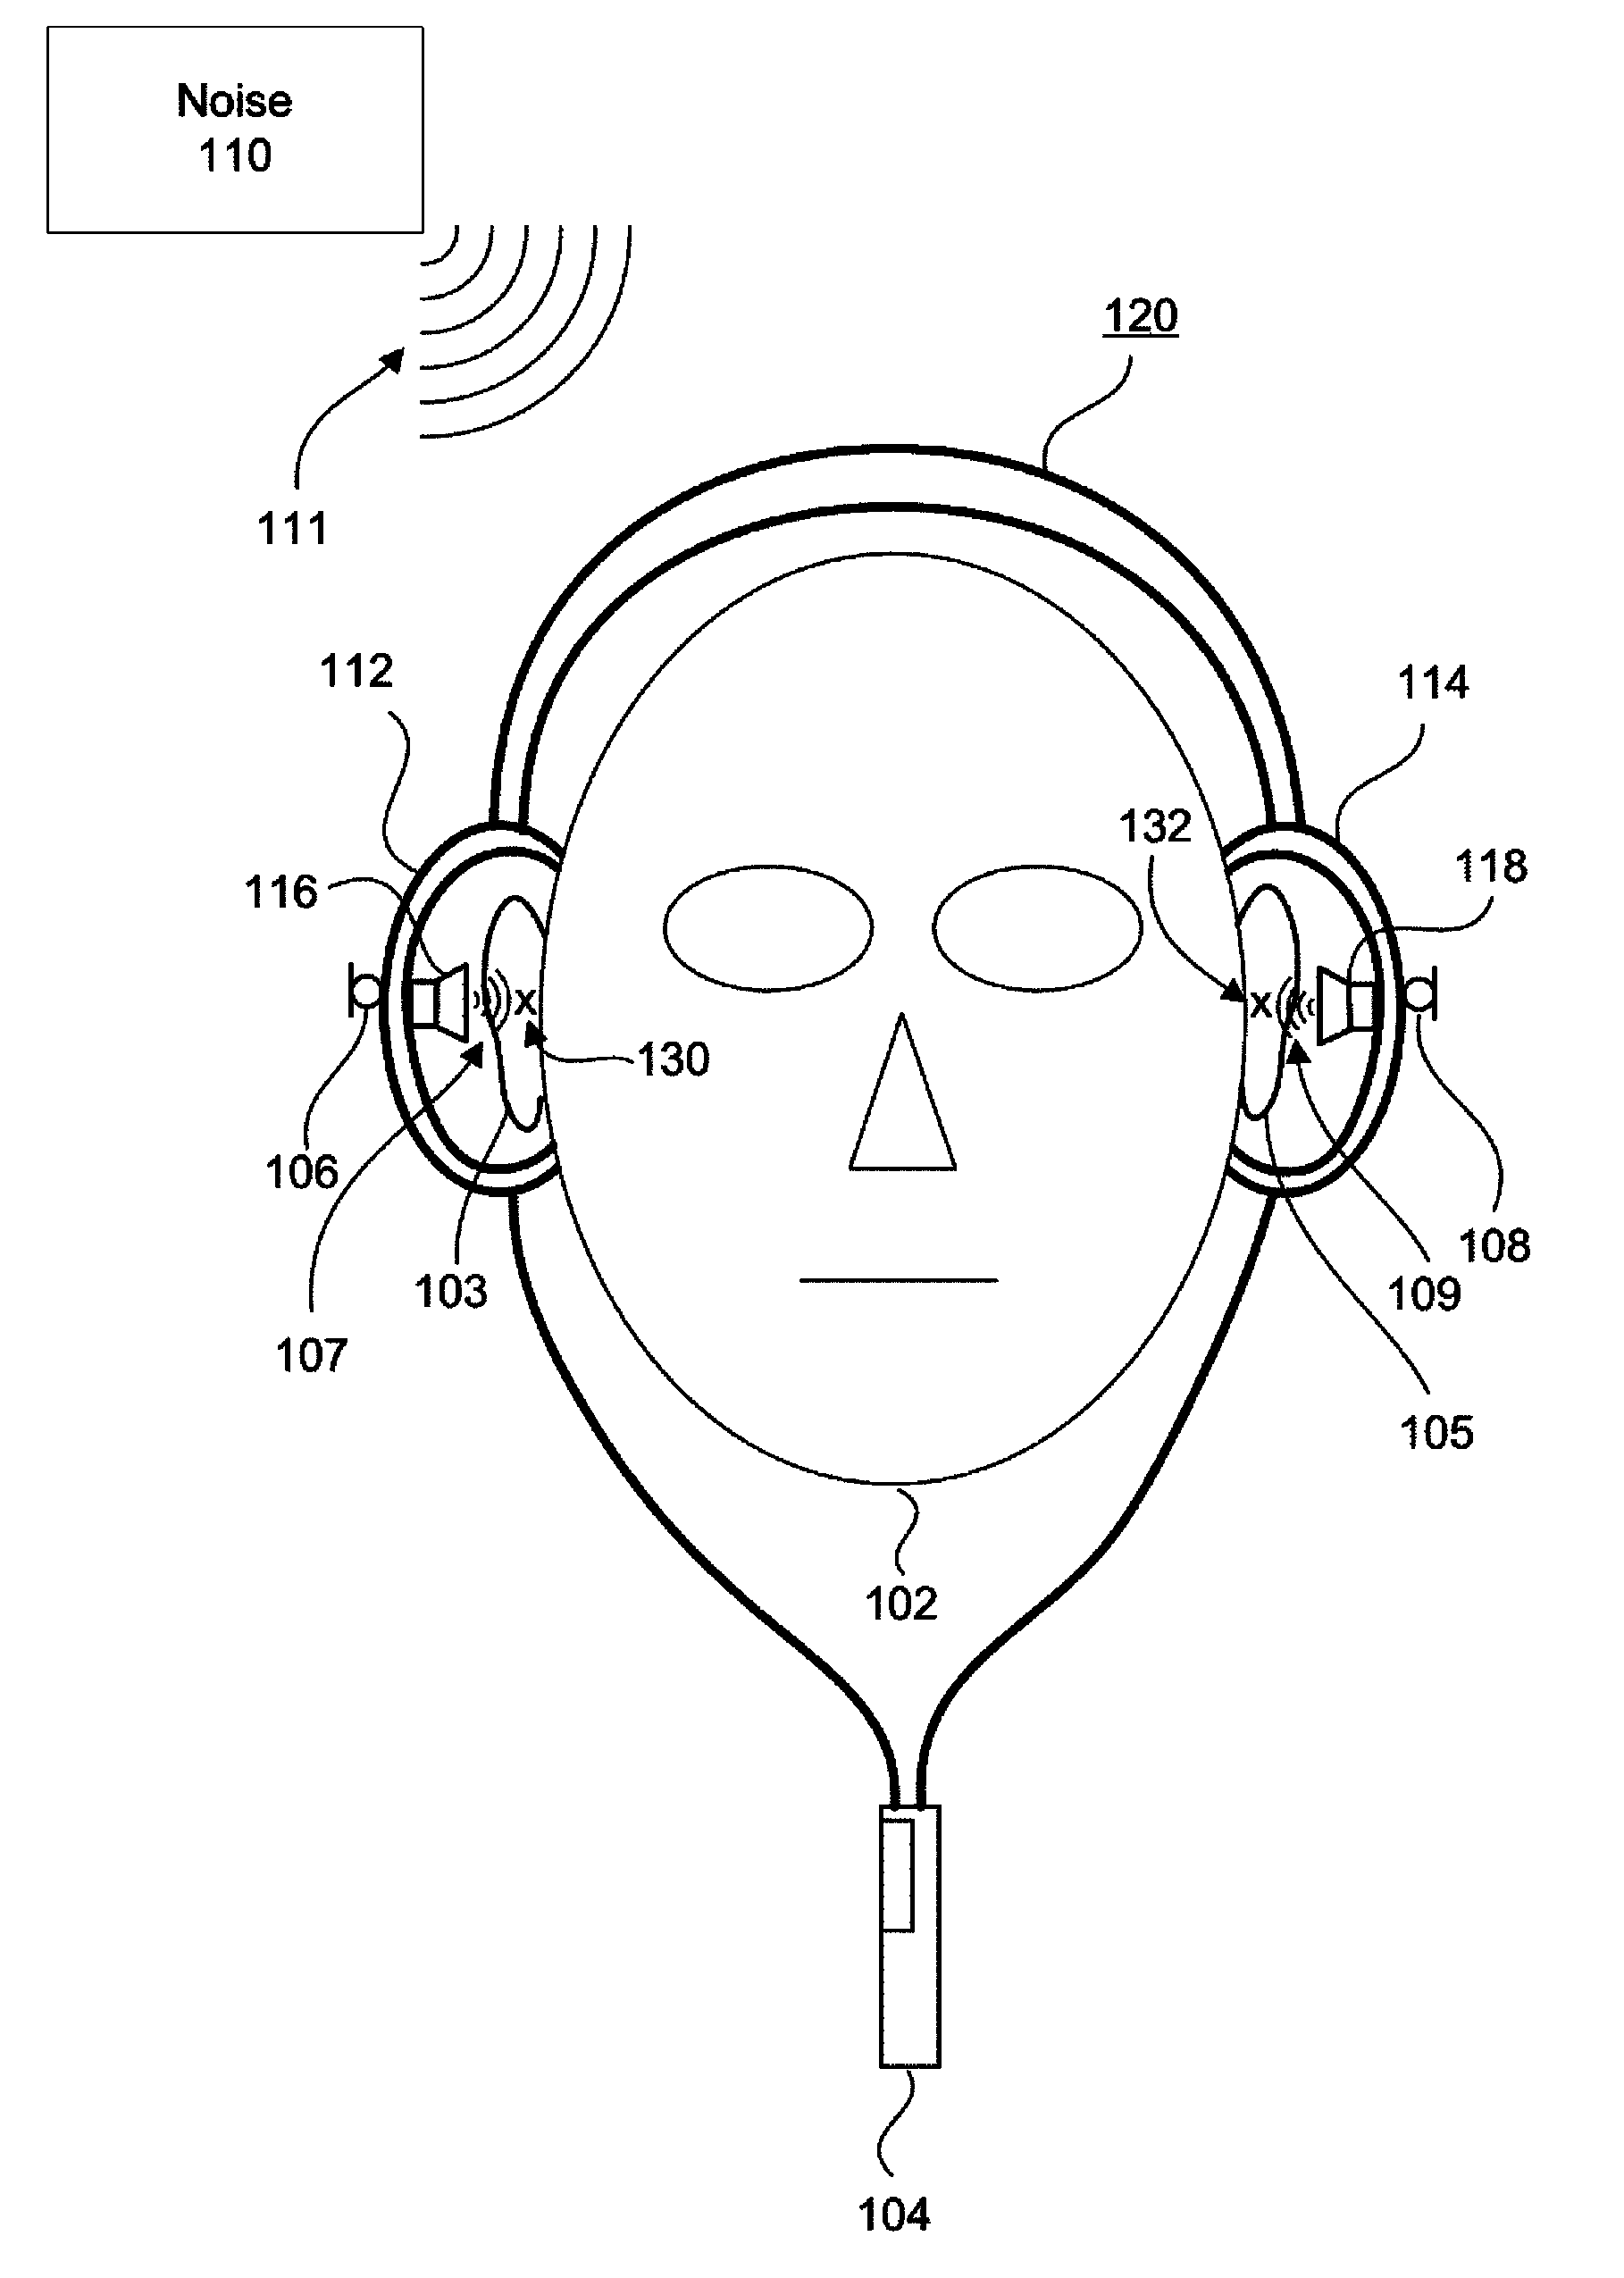 Direction-aware active noise cancellation system